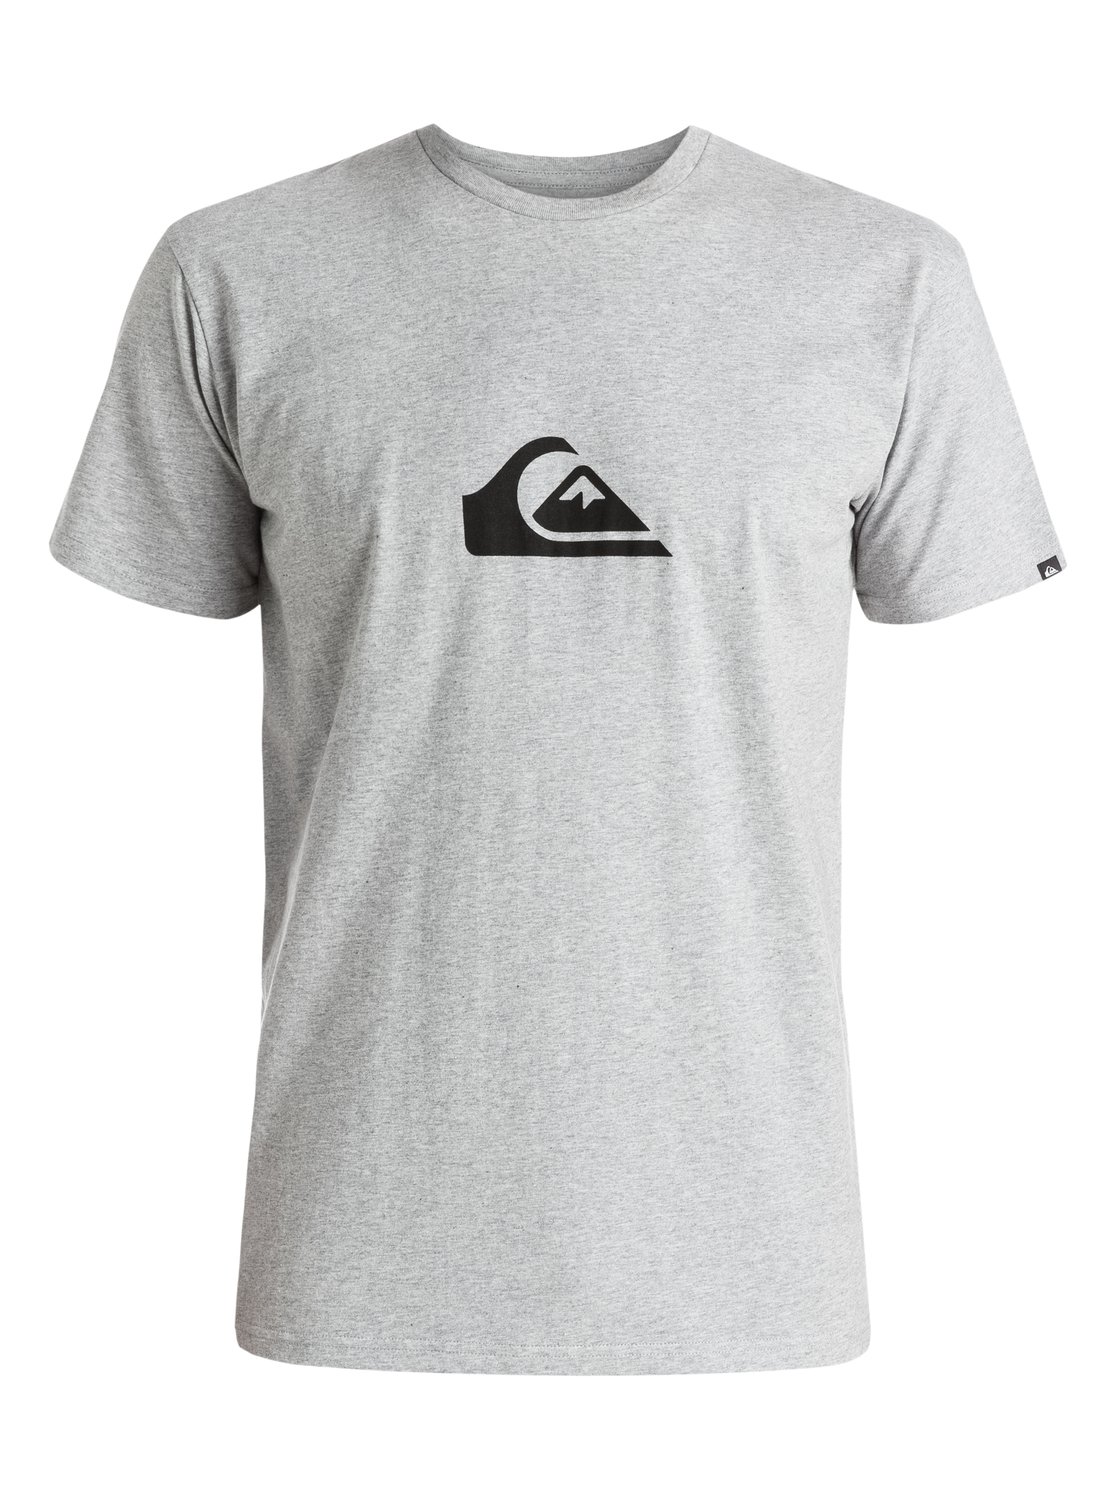 Classic Everyday MW - T-Shirt - Quiksilver - Quiksilver<br>